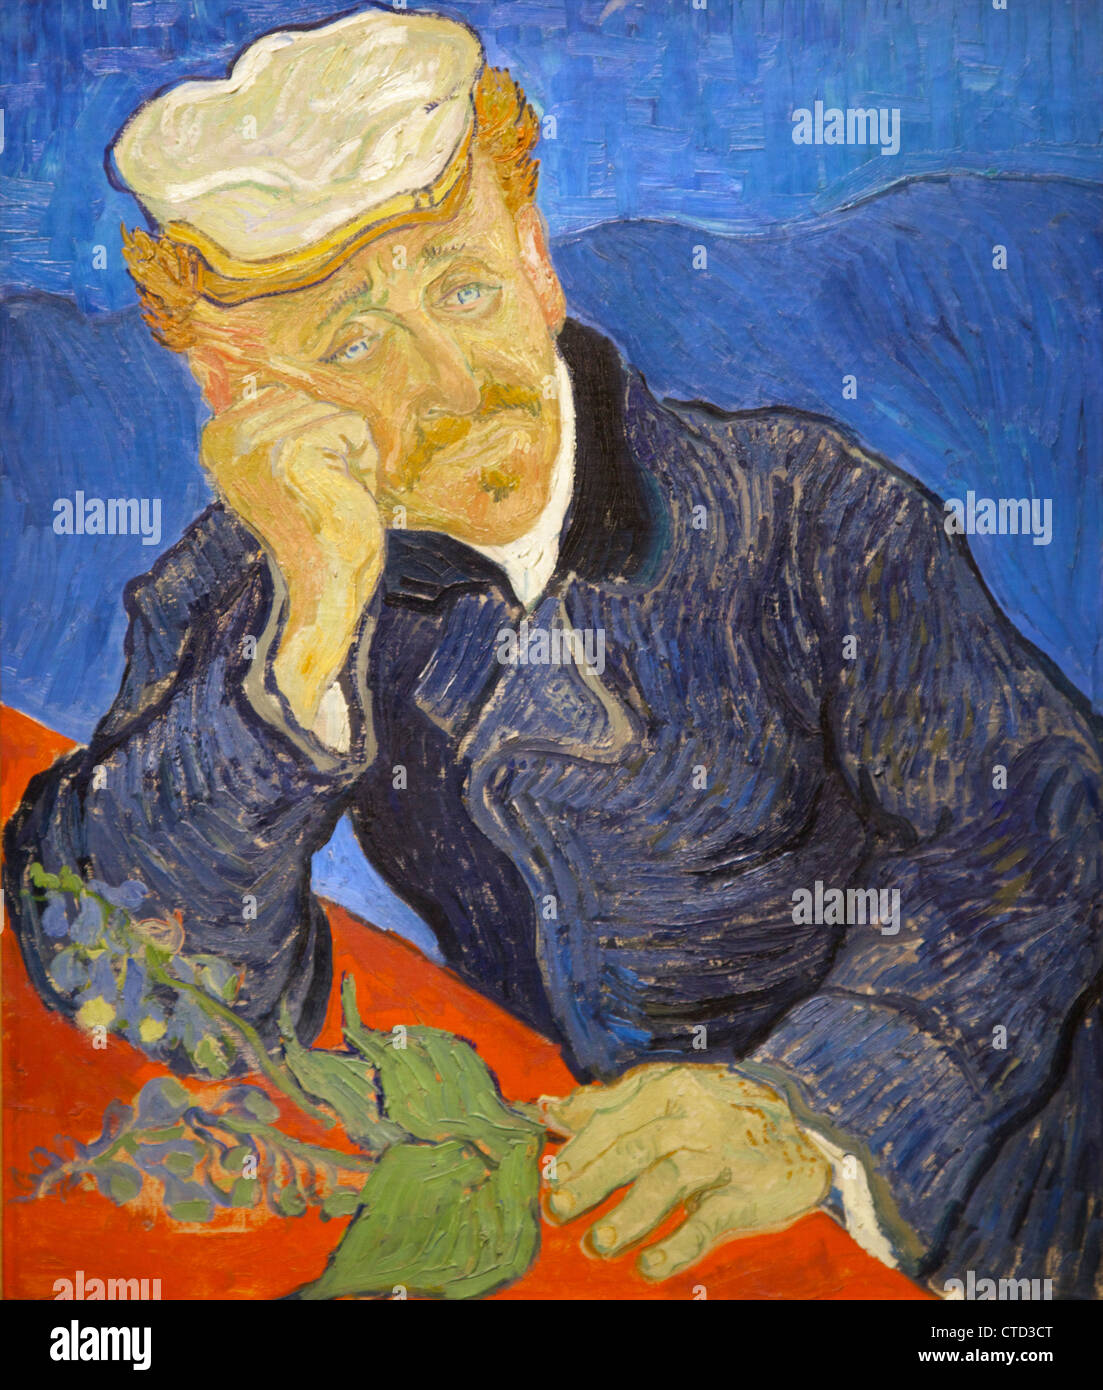 Portrait of Dr. Gachet, by Vincent van Gogh, 1890, Musee D'Orsay Orsay Museum and Art Gallery Paris France Europe Stock Photo